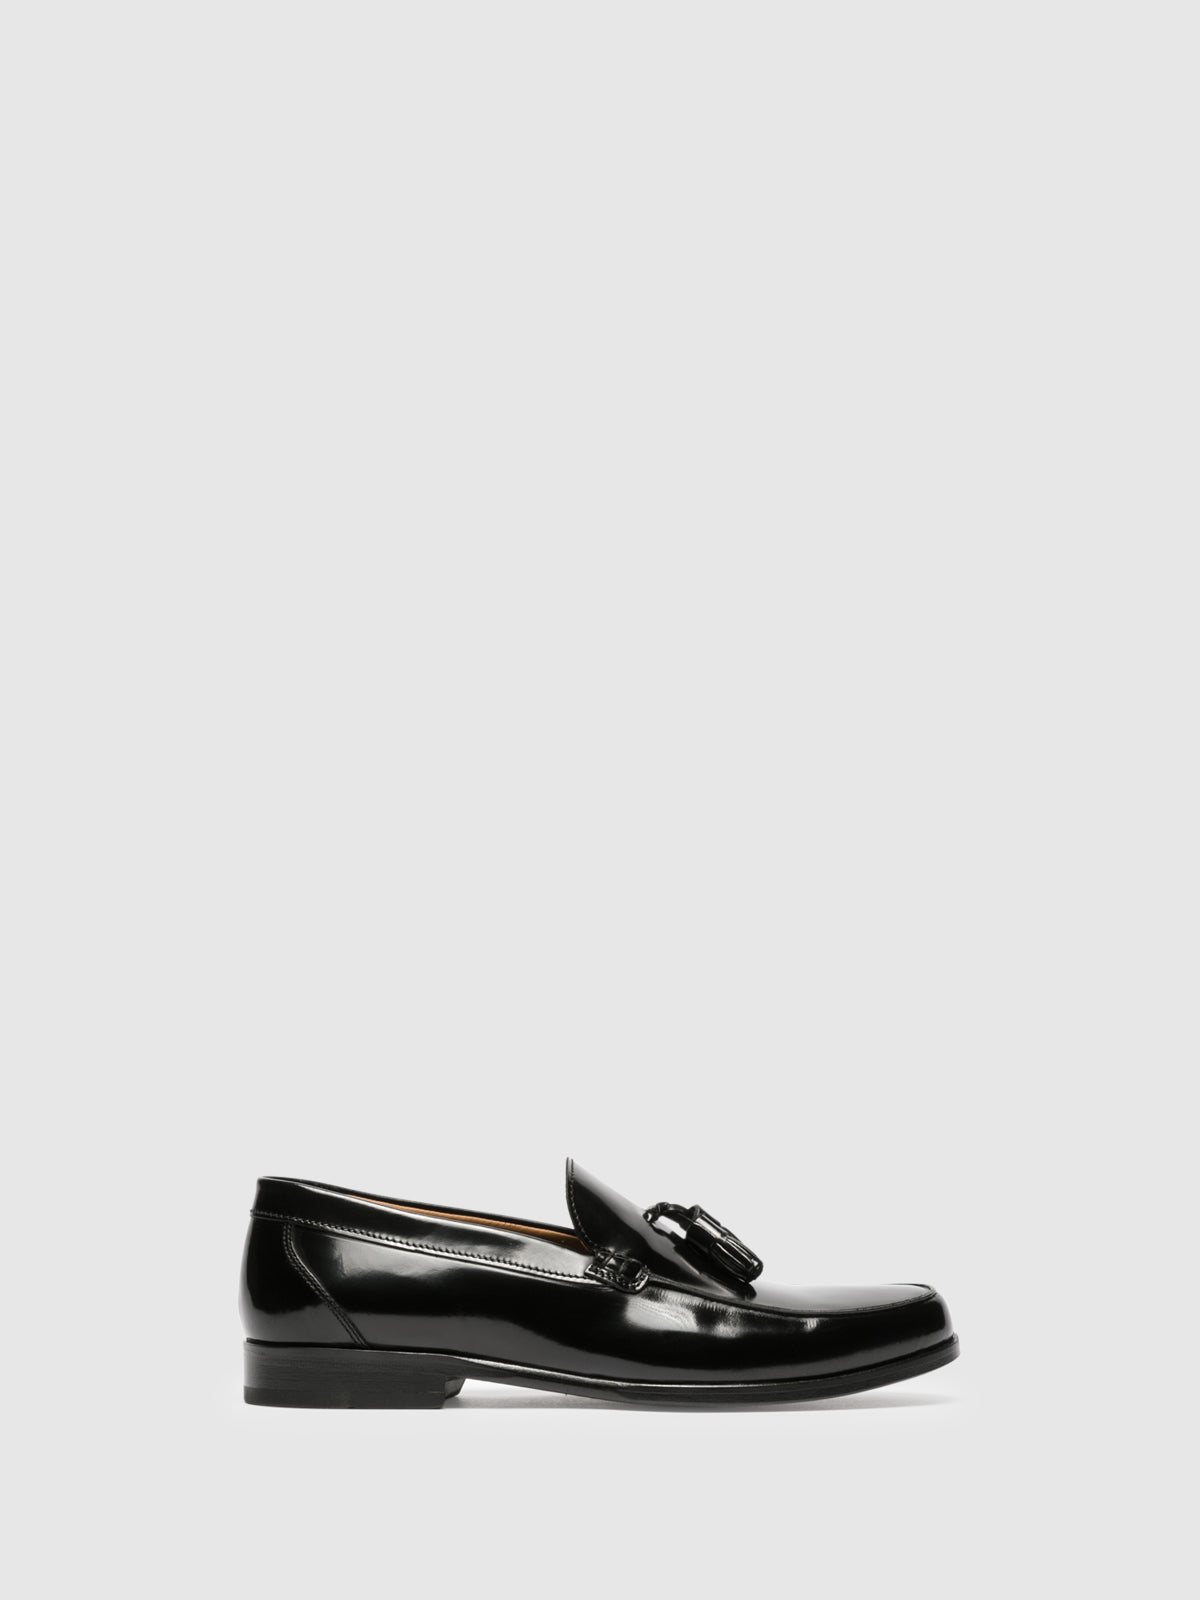 Yucca Black Loafers Shoes